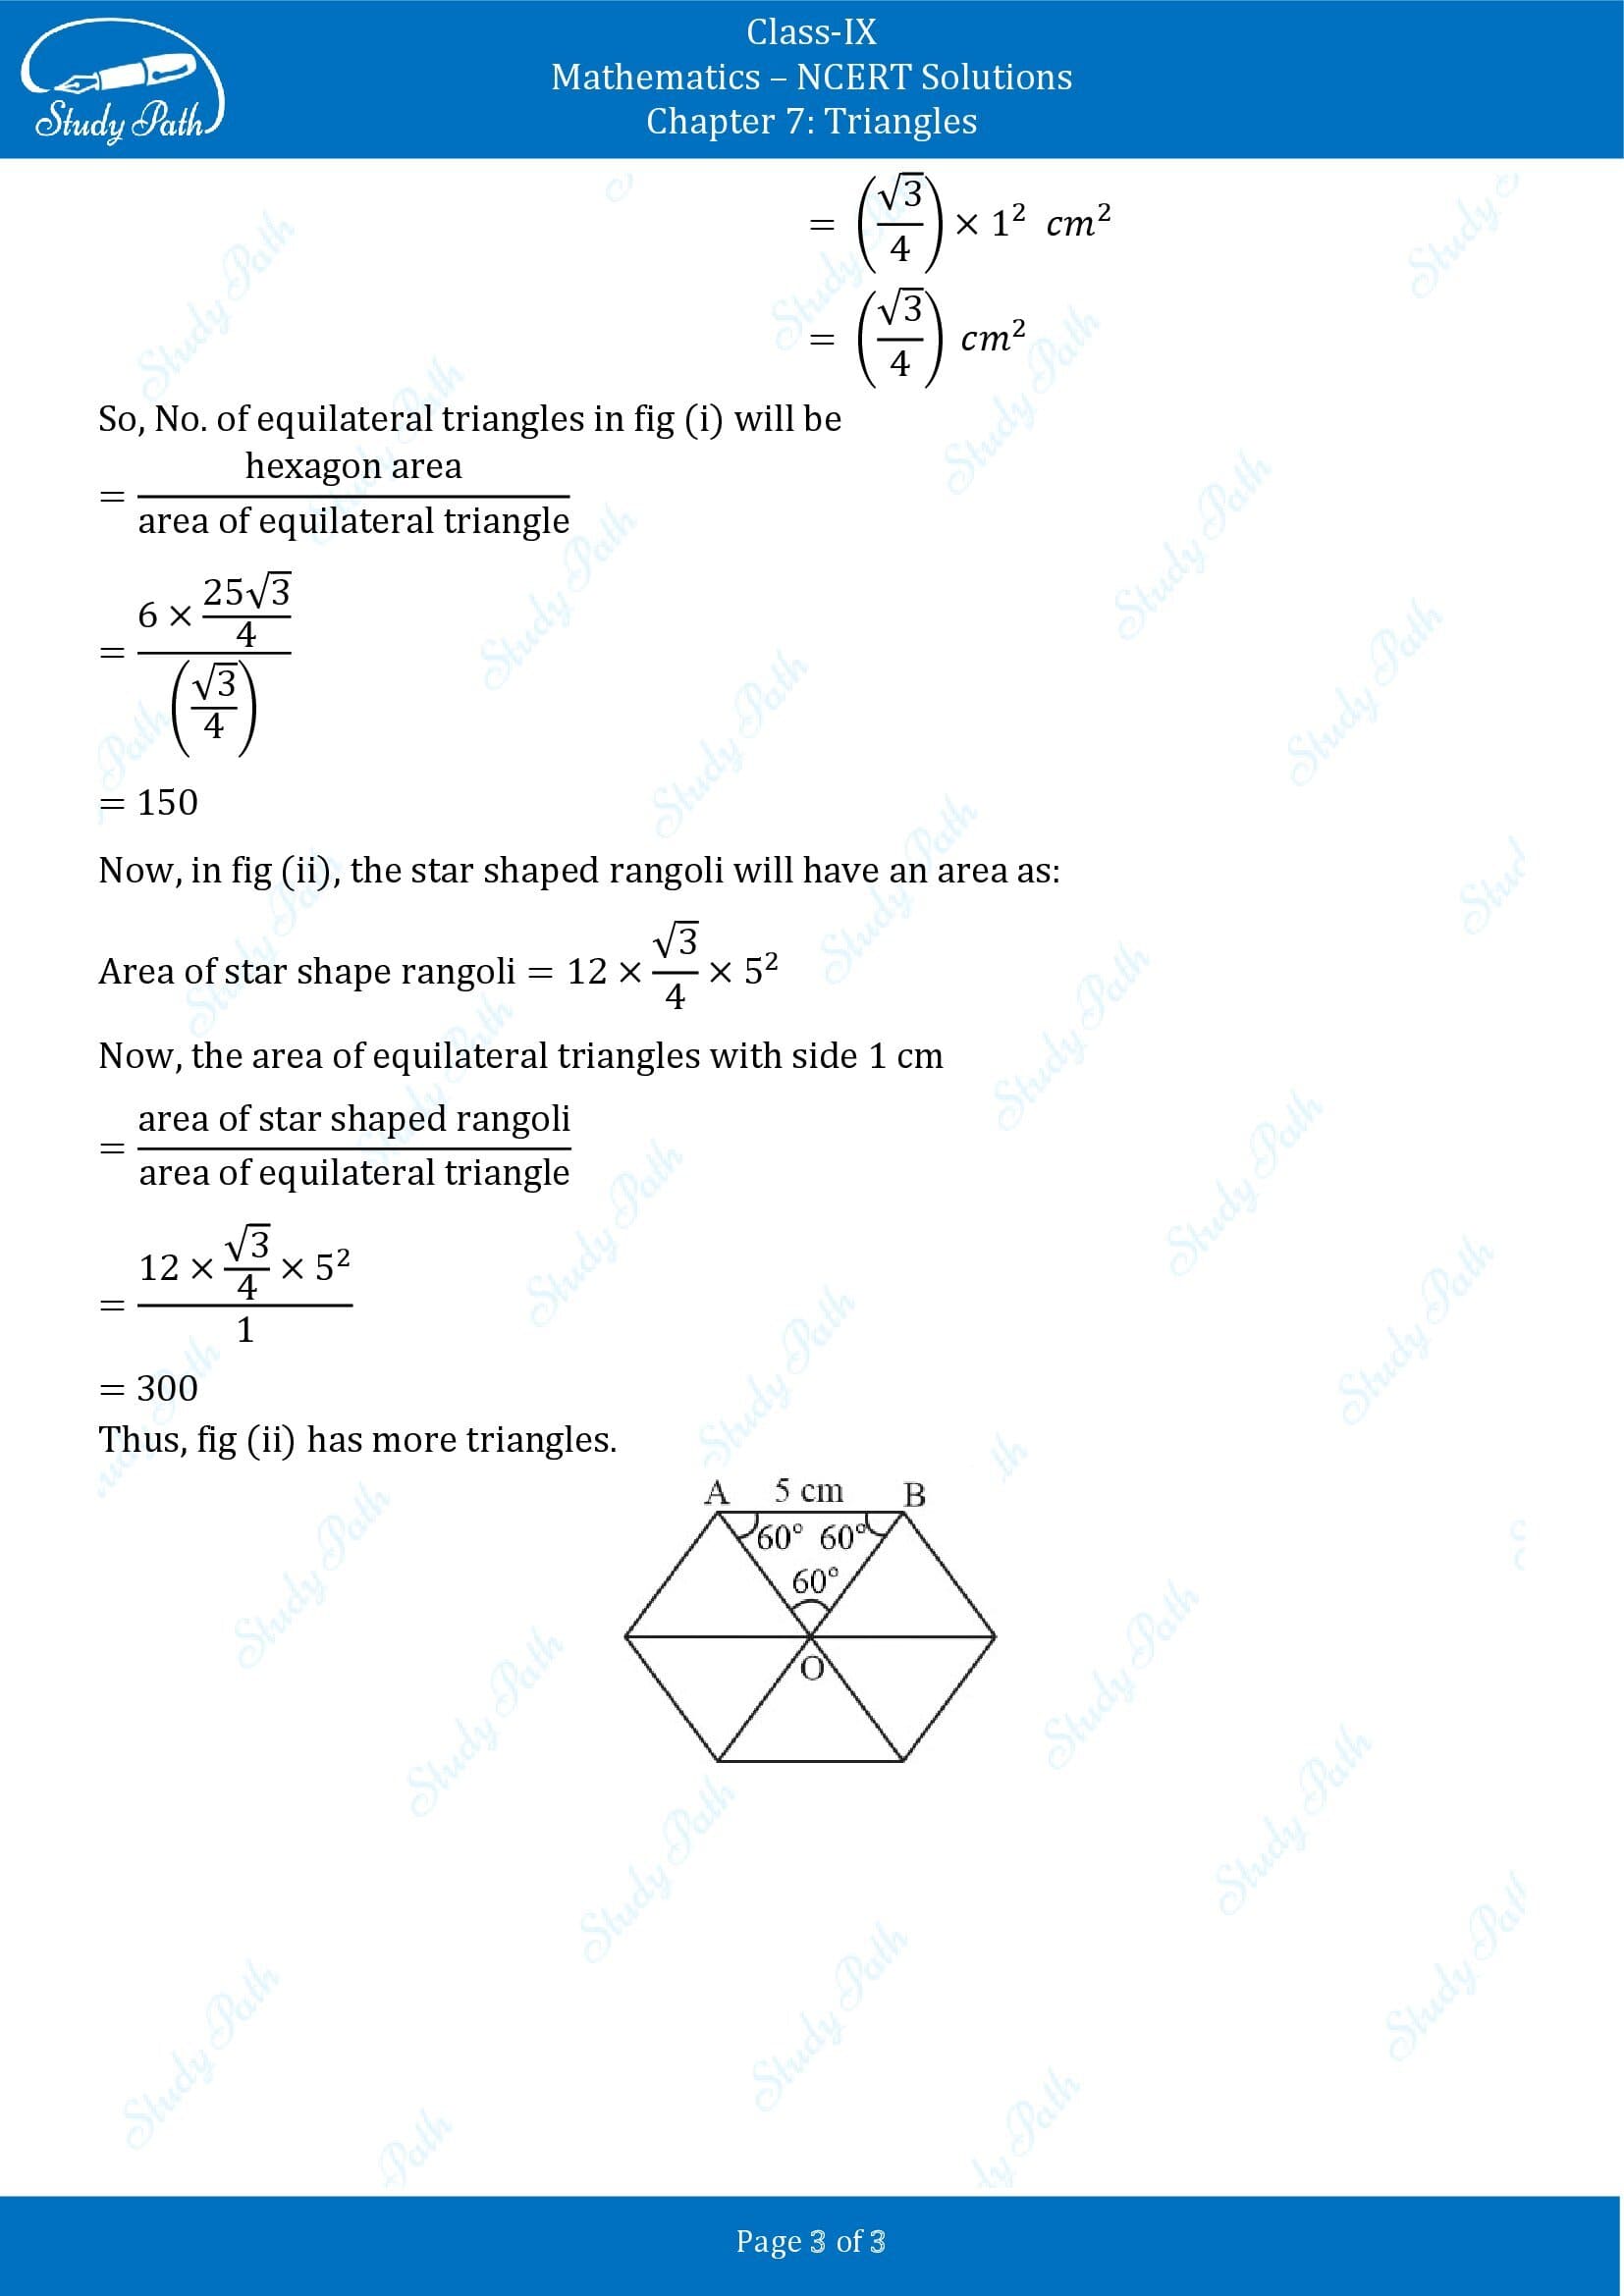 NCERT Solutions for Class 9 Maths Chapter 7 Triangles Exercise 7.5 00003